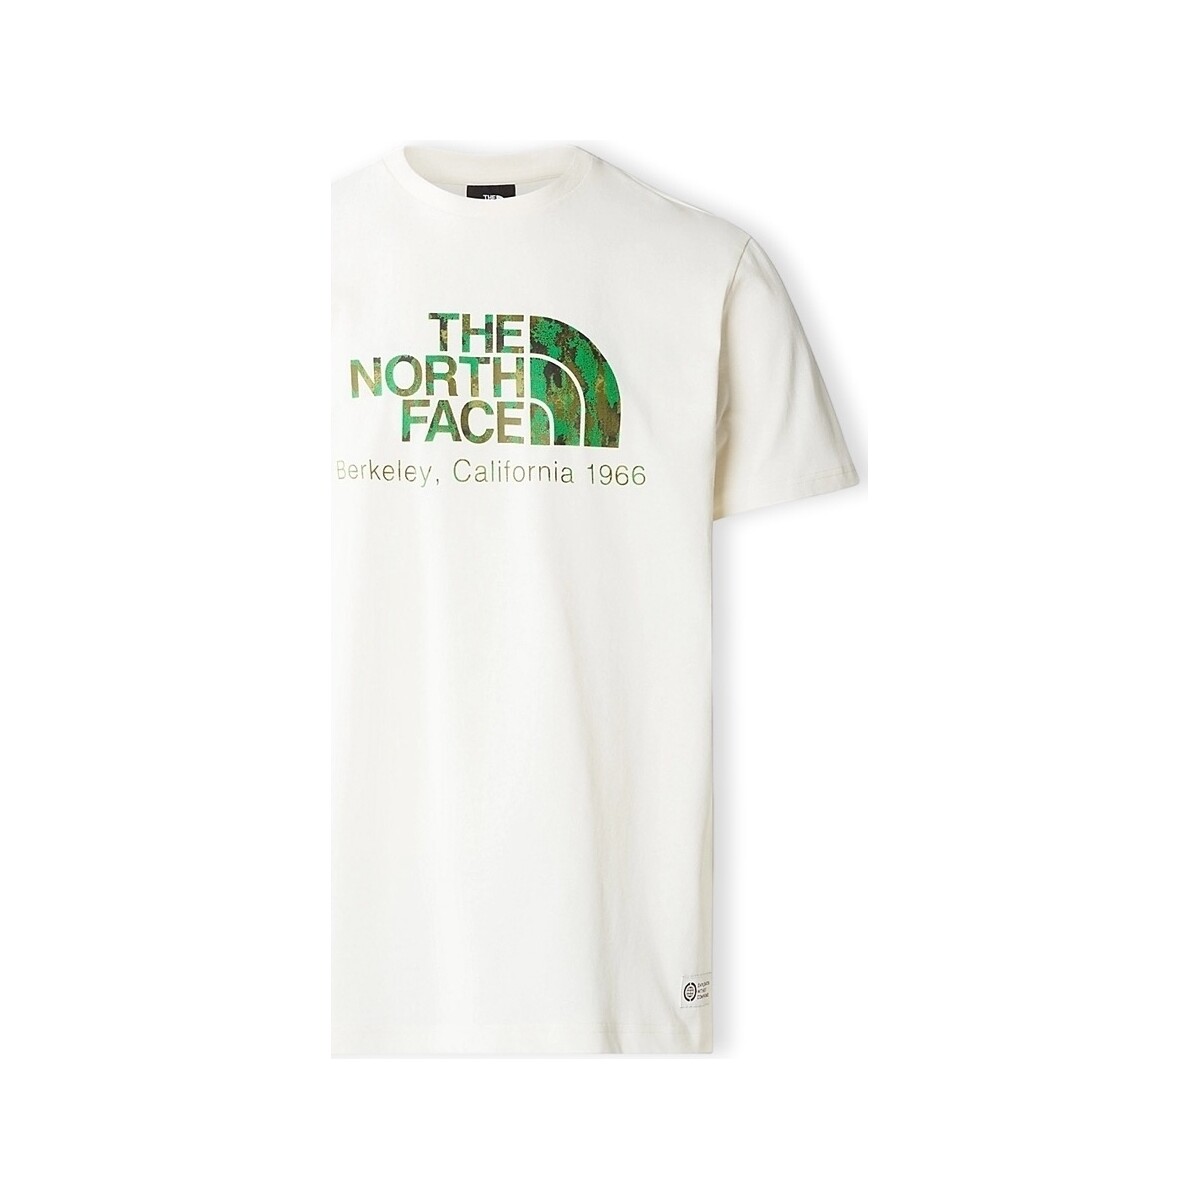 Textiel Heren T-shirts & Polo’s The North Face Berkeley California T-Shirt - White Dune Wit